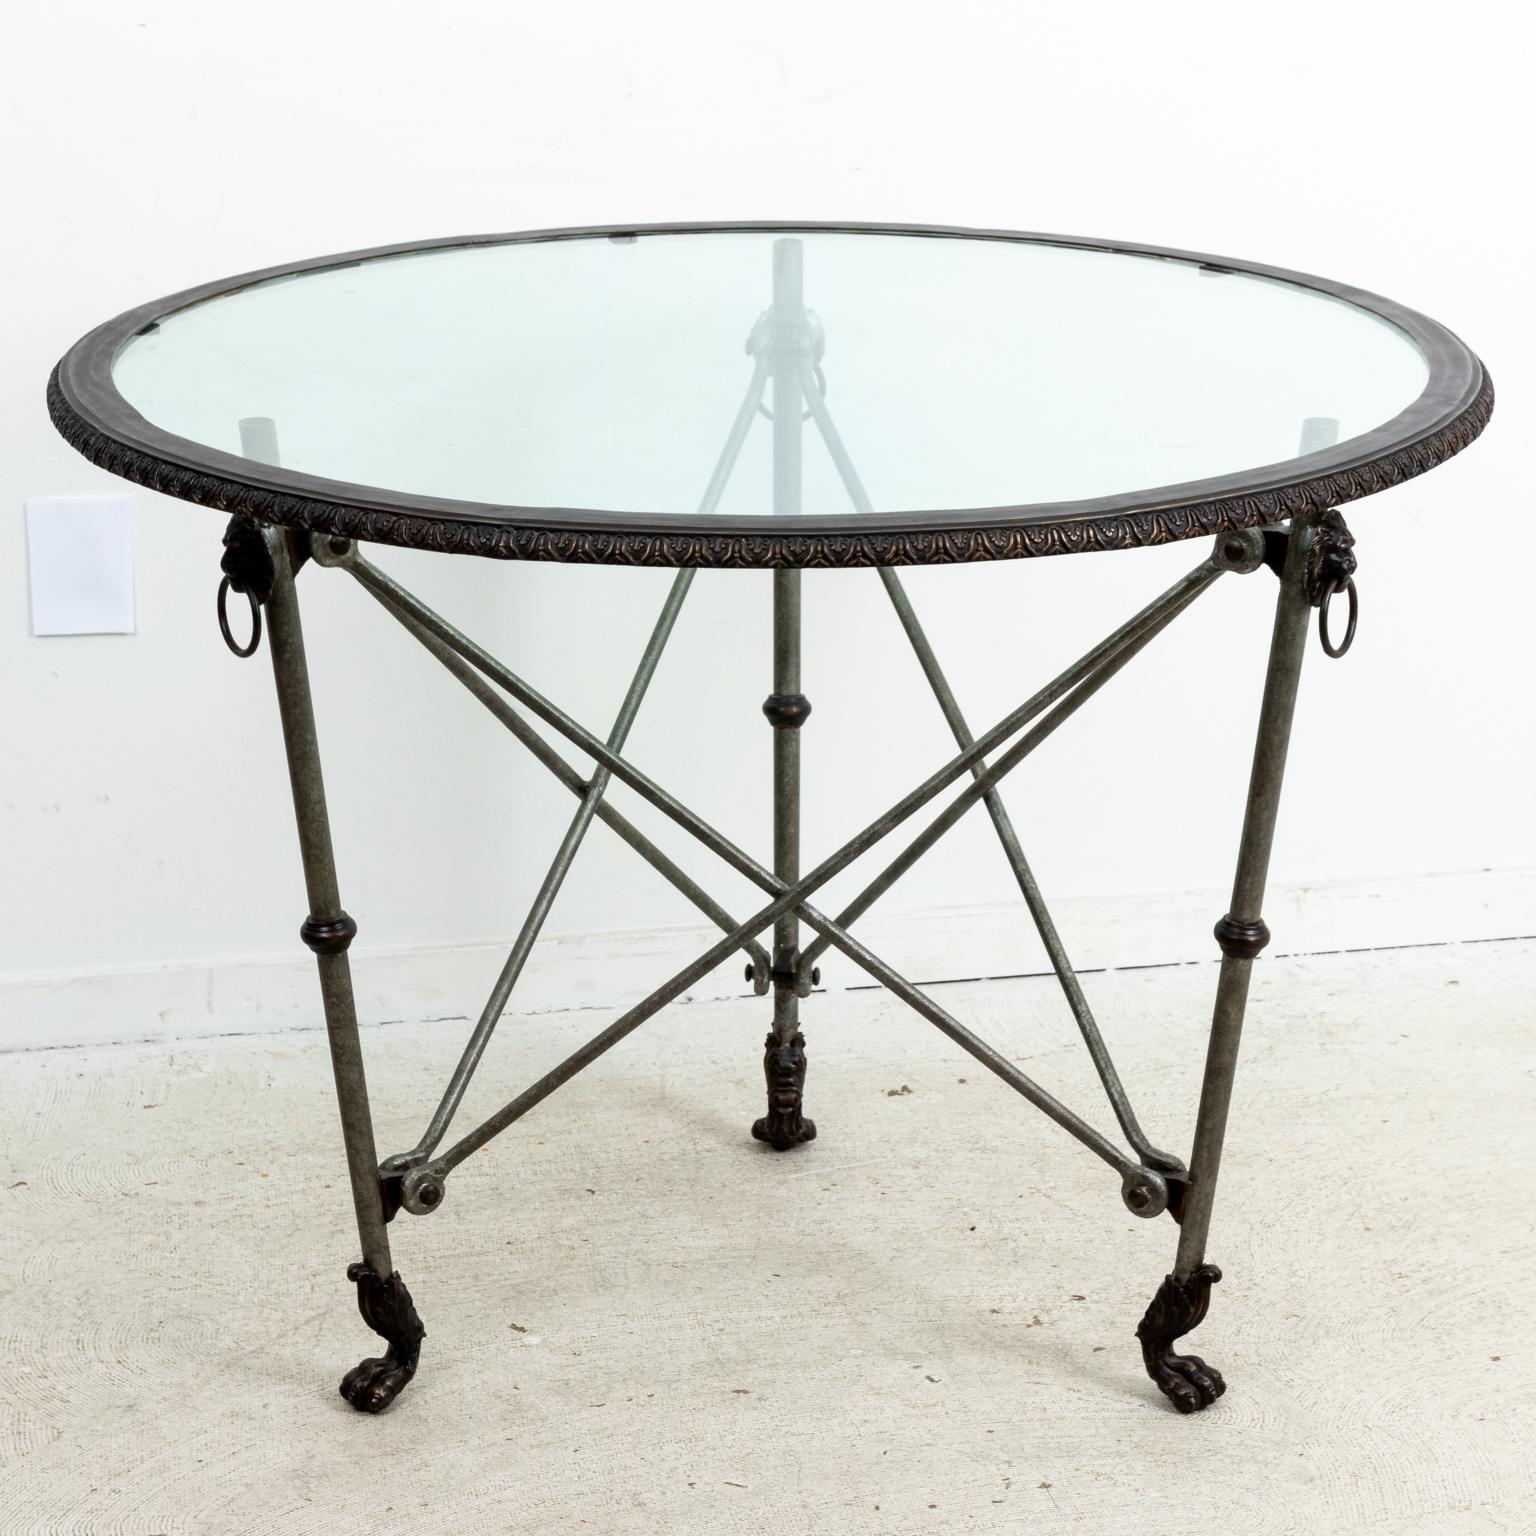 Circa 1980-1990s Ralph Lauren iron and glass gueridon lion's head table with bottom stretcher, lion's paw feet and removable tabletop. Made in the United States. Please note of wear consistent with age including some light scratches on the glass.